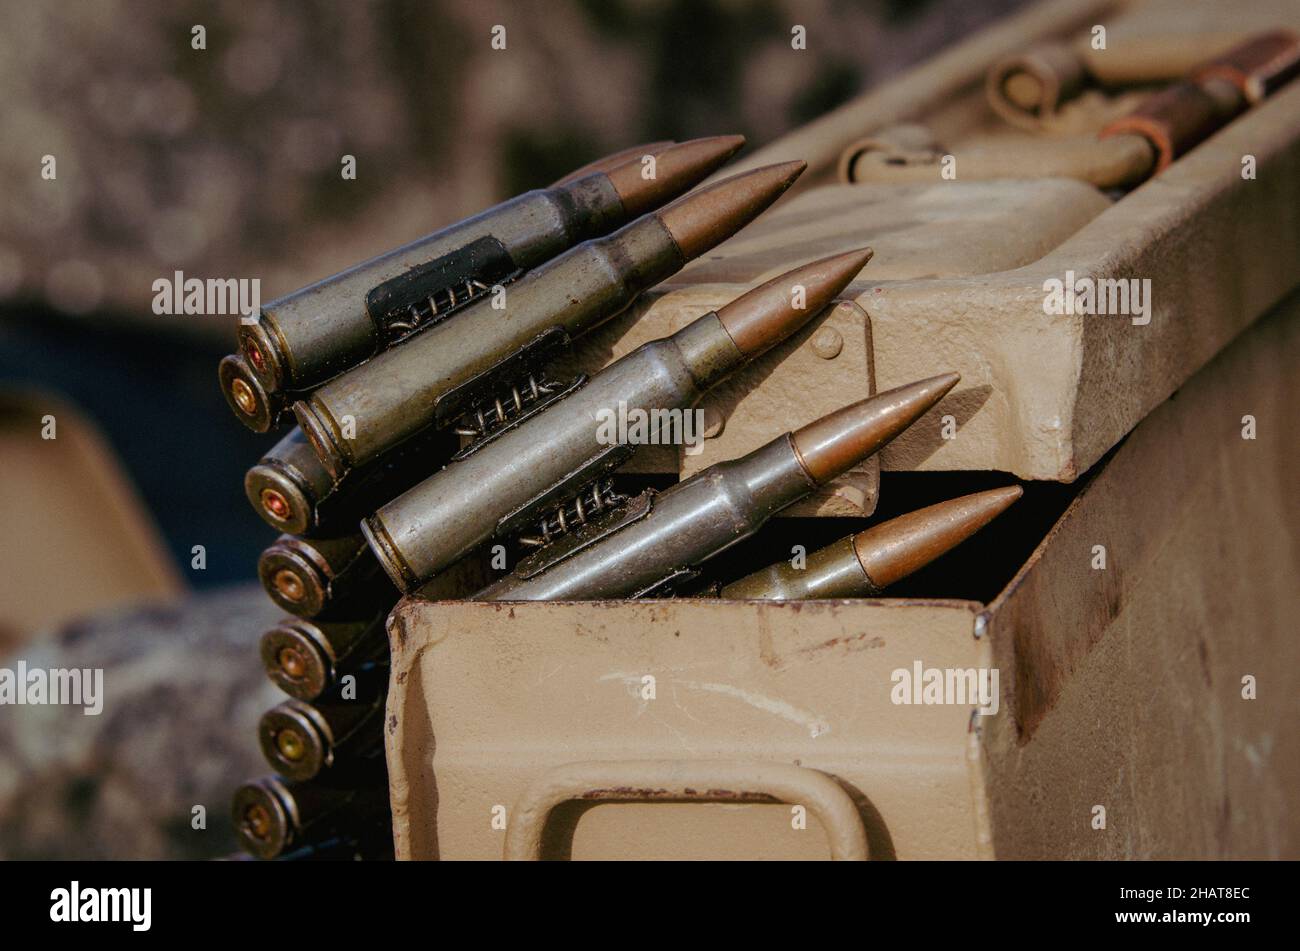 A metal ammunition tin with a belt of machine gun bullets coming from it. Showing a few bullets close up Stock Photo